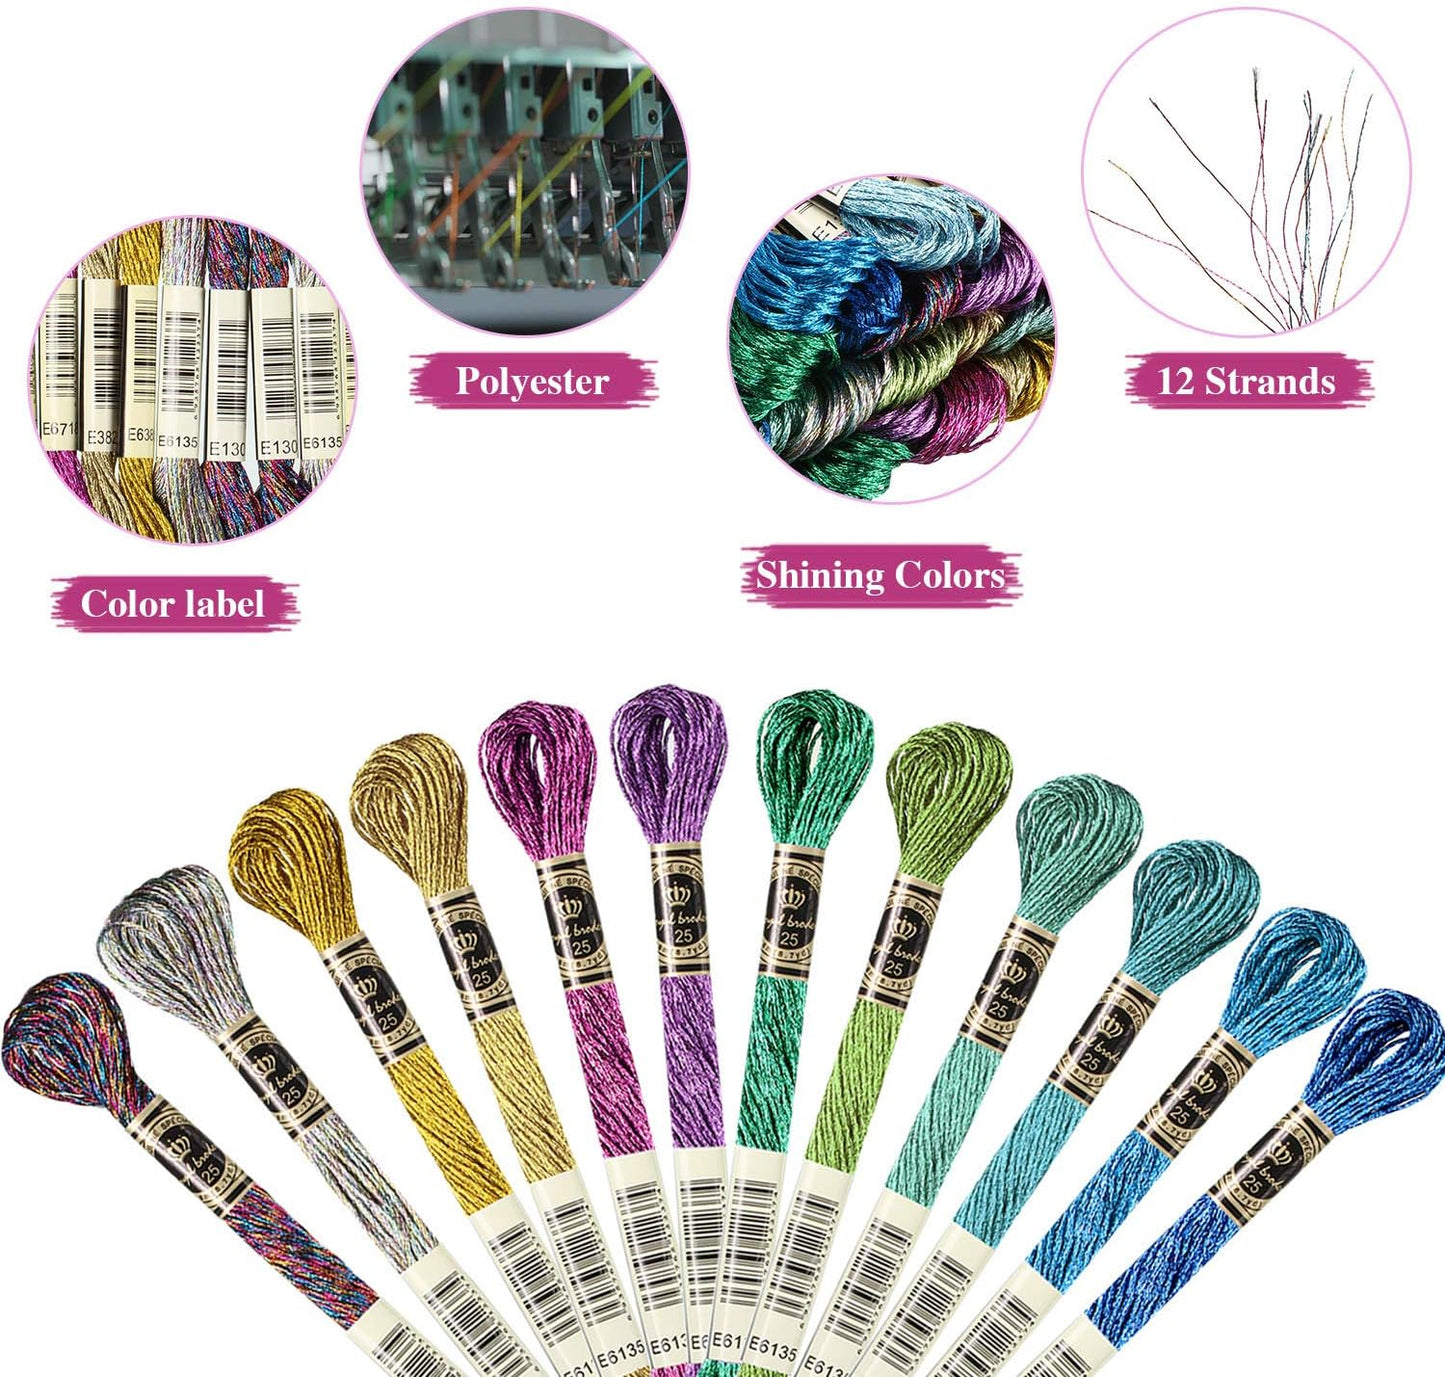 24 Pieces Metallic Embroidery Floss Multicolor Embroidery Skein Threads Glitter Embroidery Thread Cross Stitch Polyester Thread for Friendship Bracelets DIY Embroidery Thread Crafts